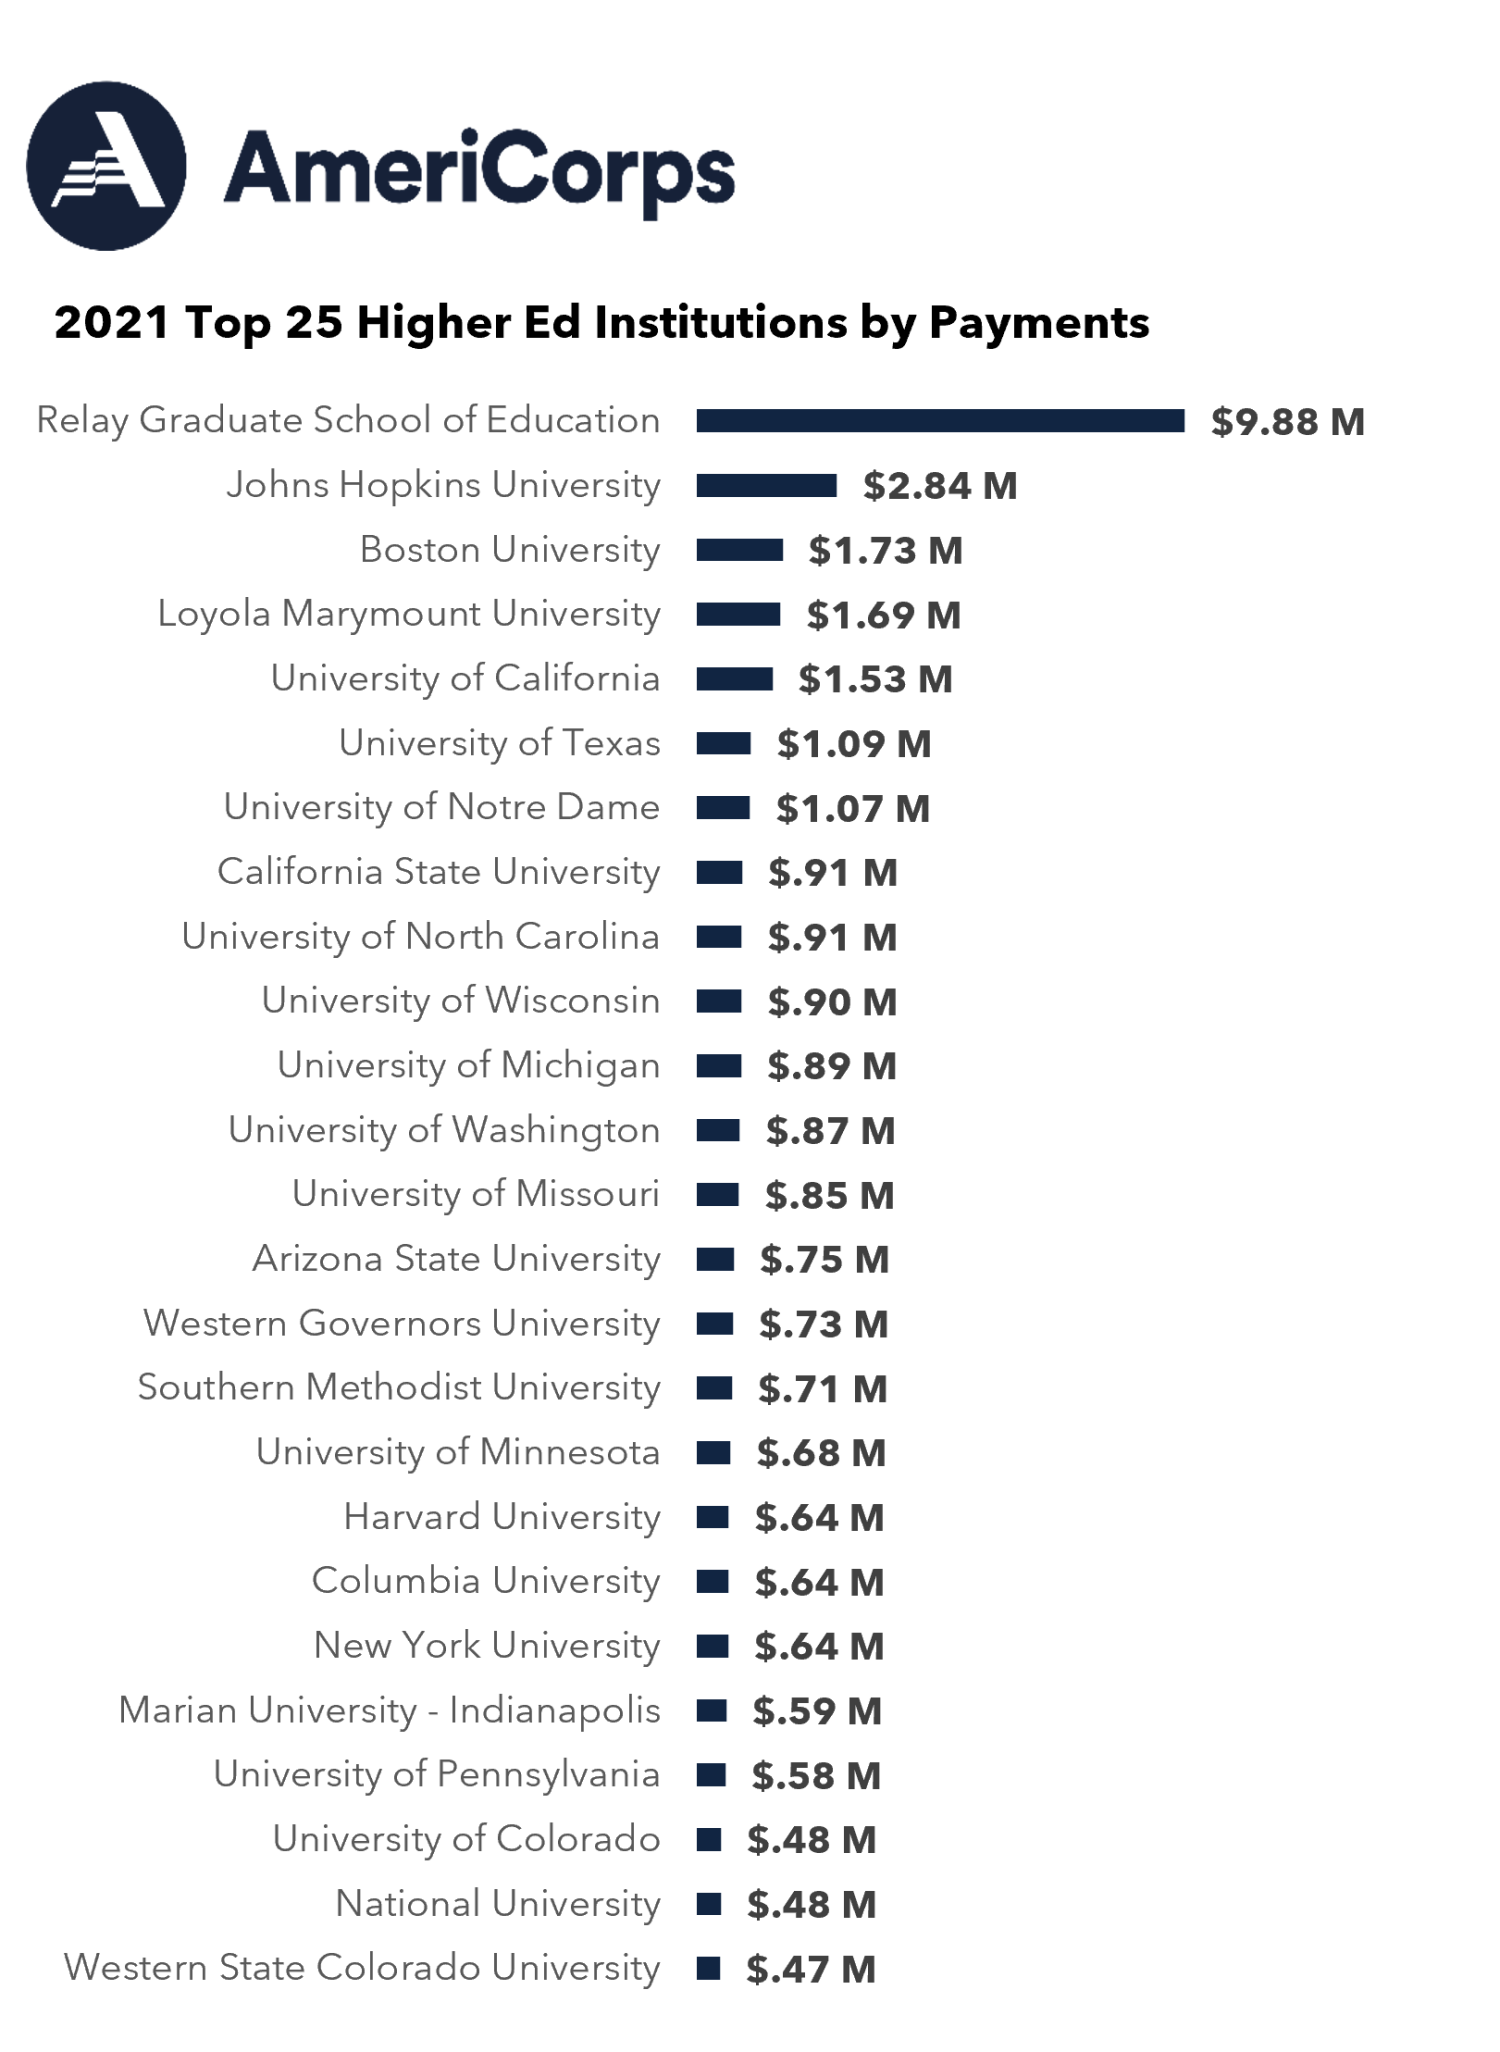 2021 Top 25 Higher Education Institutions By Payment